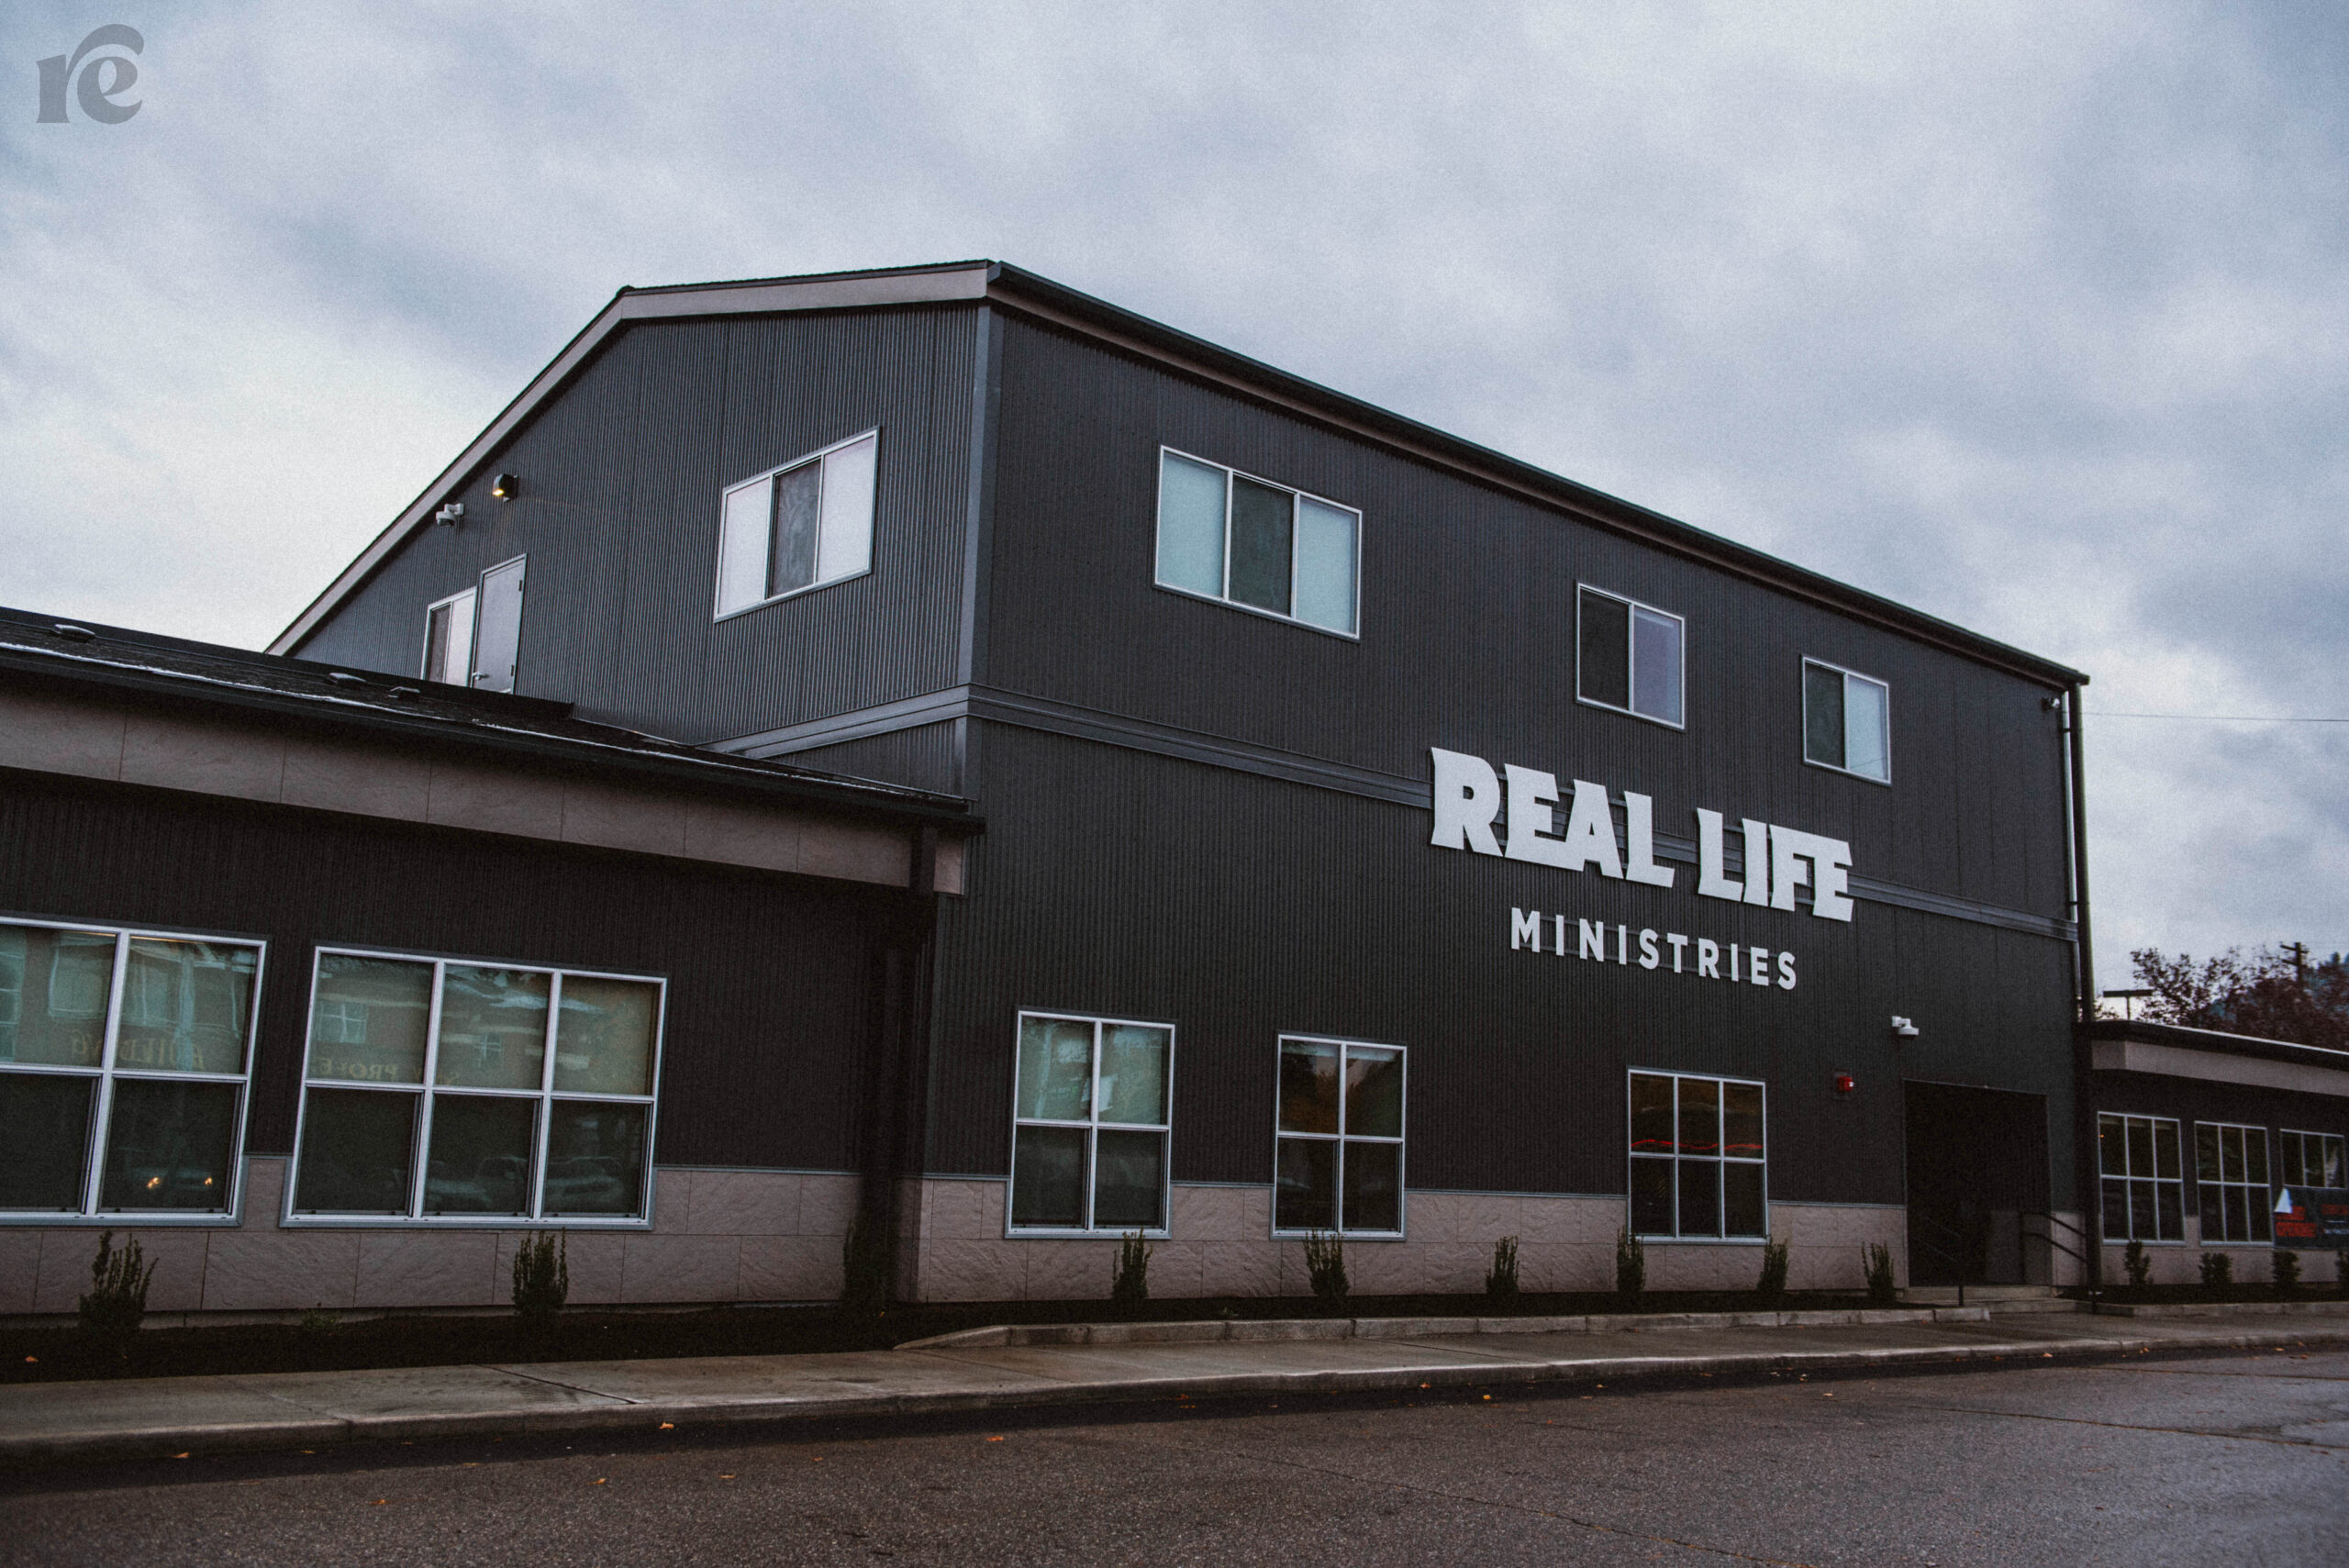 Outside of Real Life Ministries